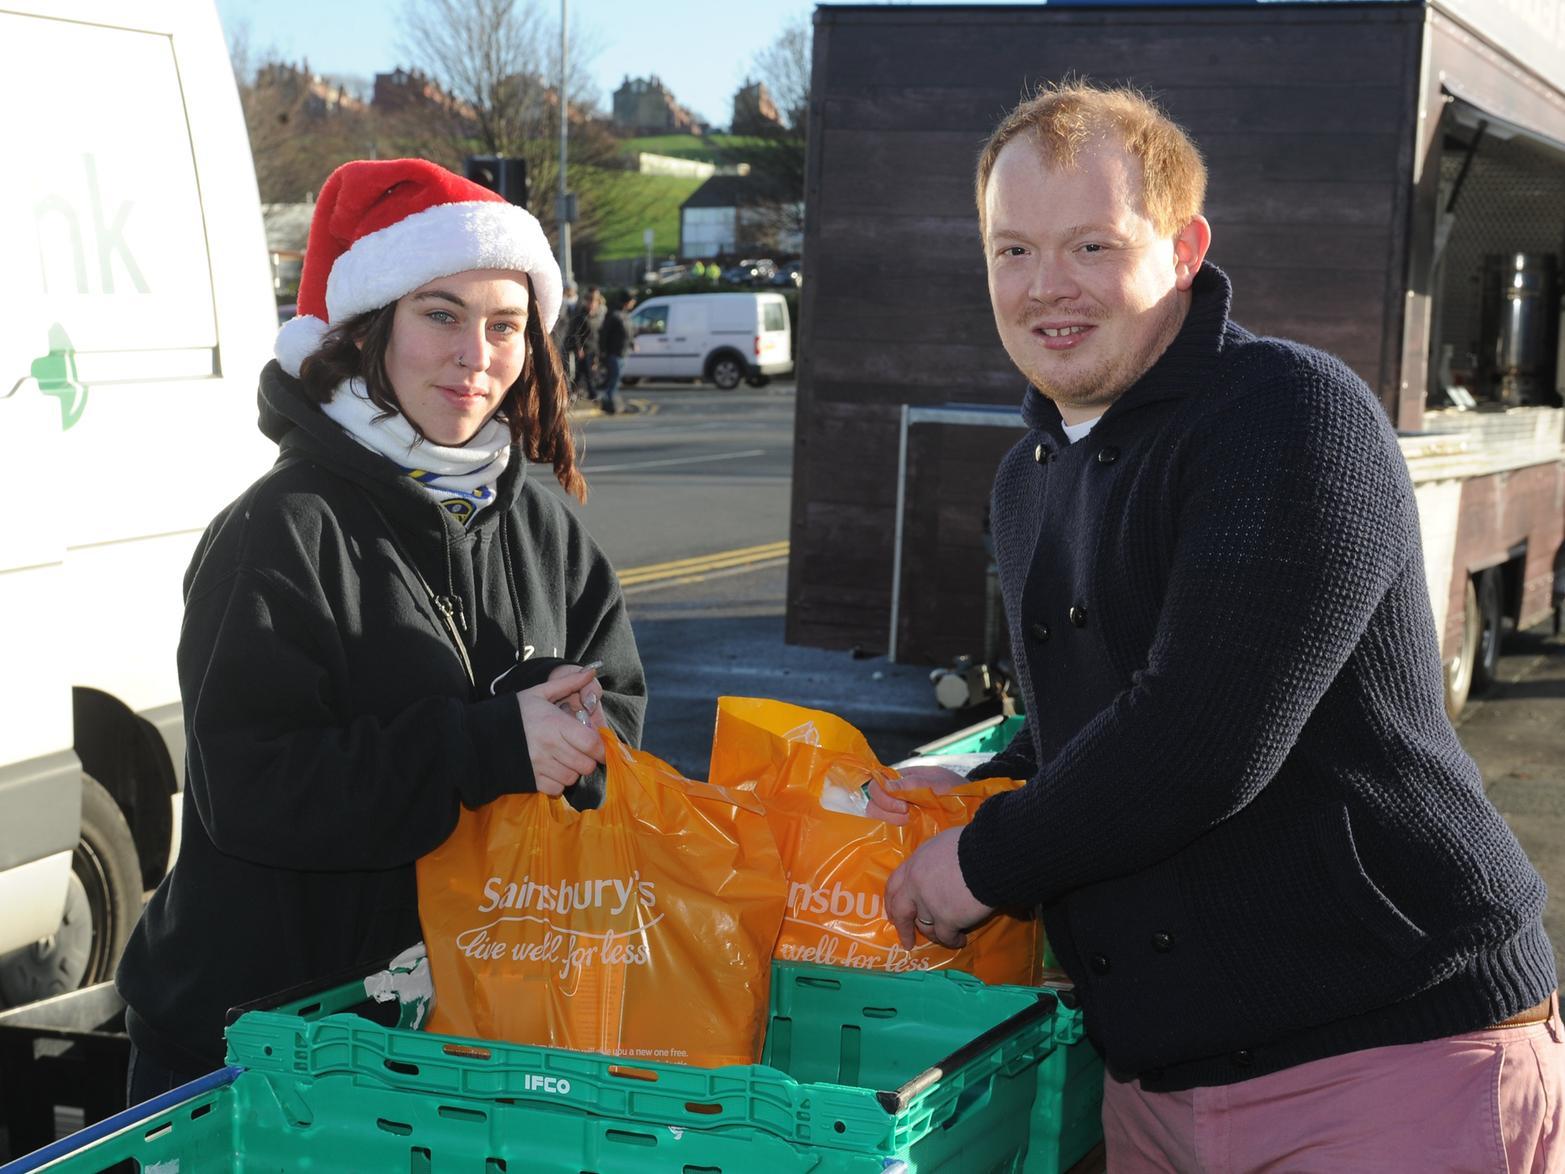 Make your your leftover food doesn't go to waste this Christmas. More details here: https://www.leeds.gov.uk/leedsmic/food-banks